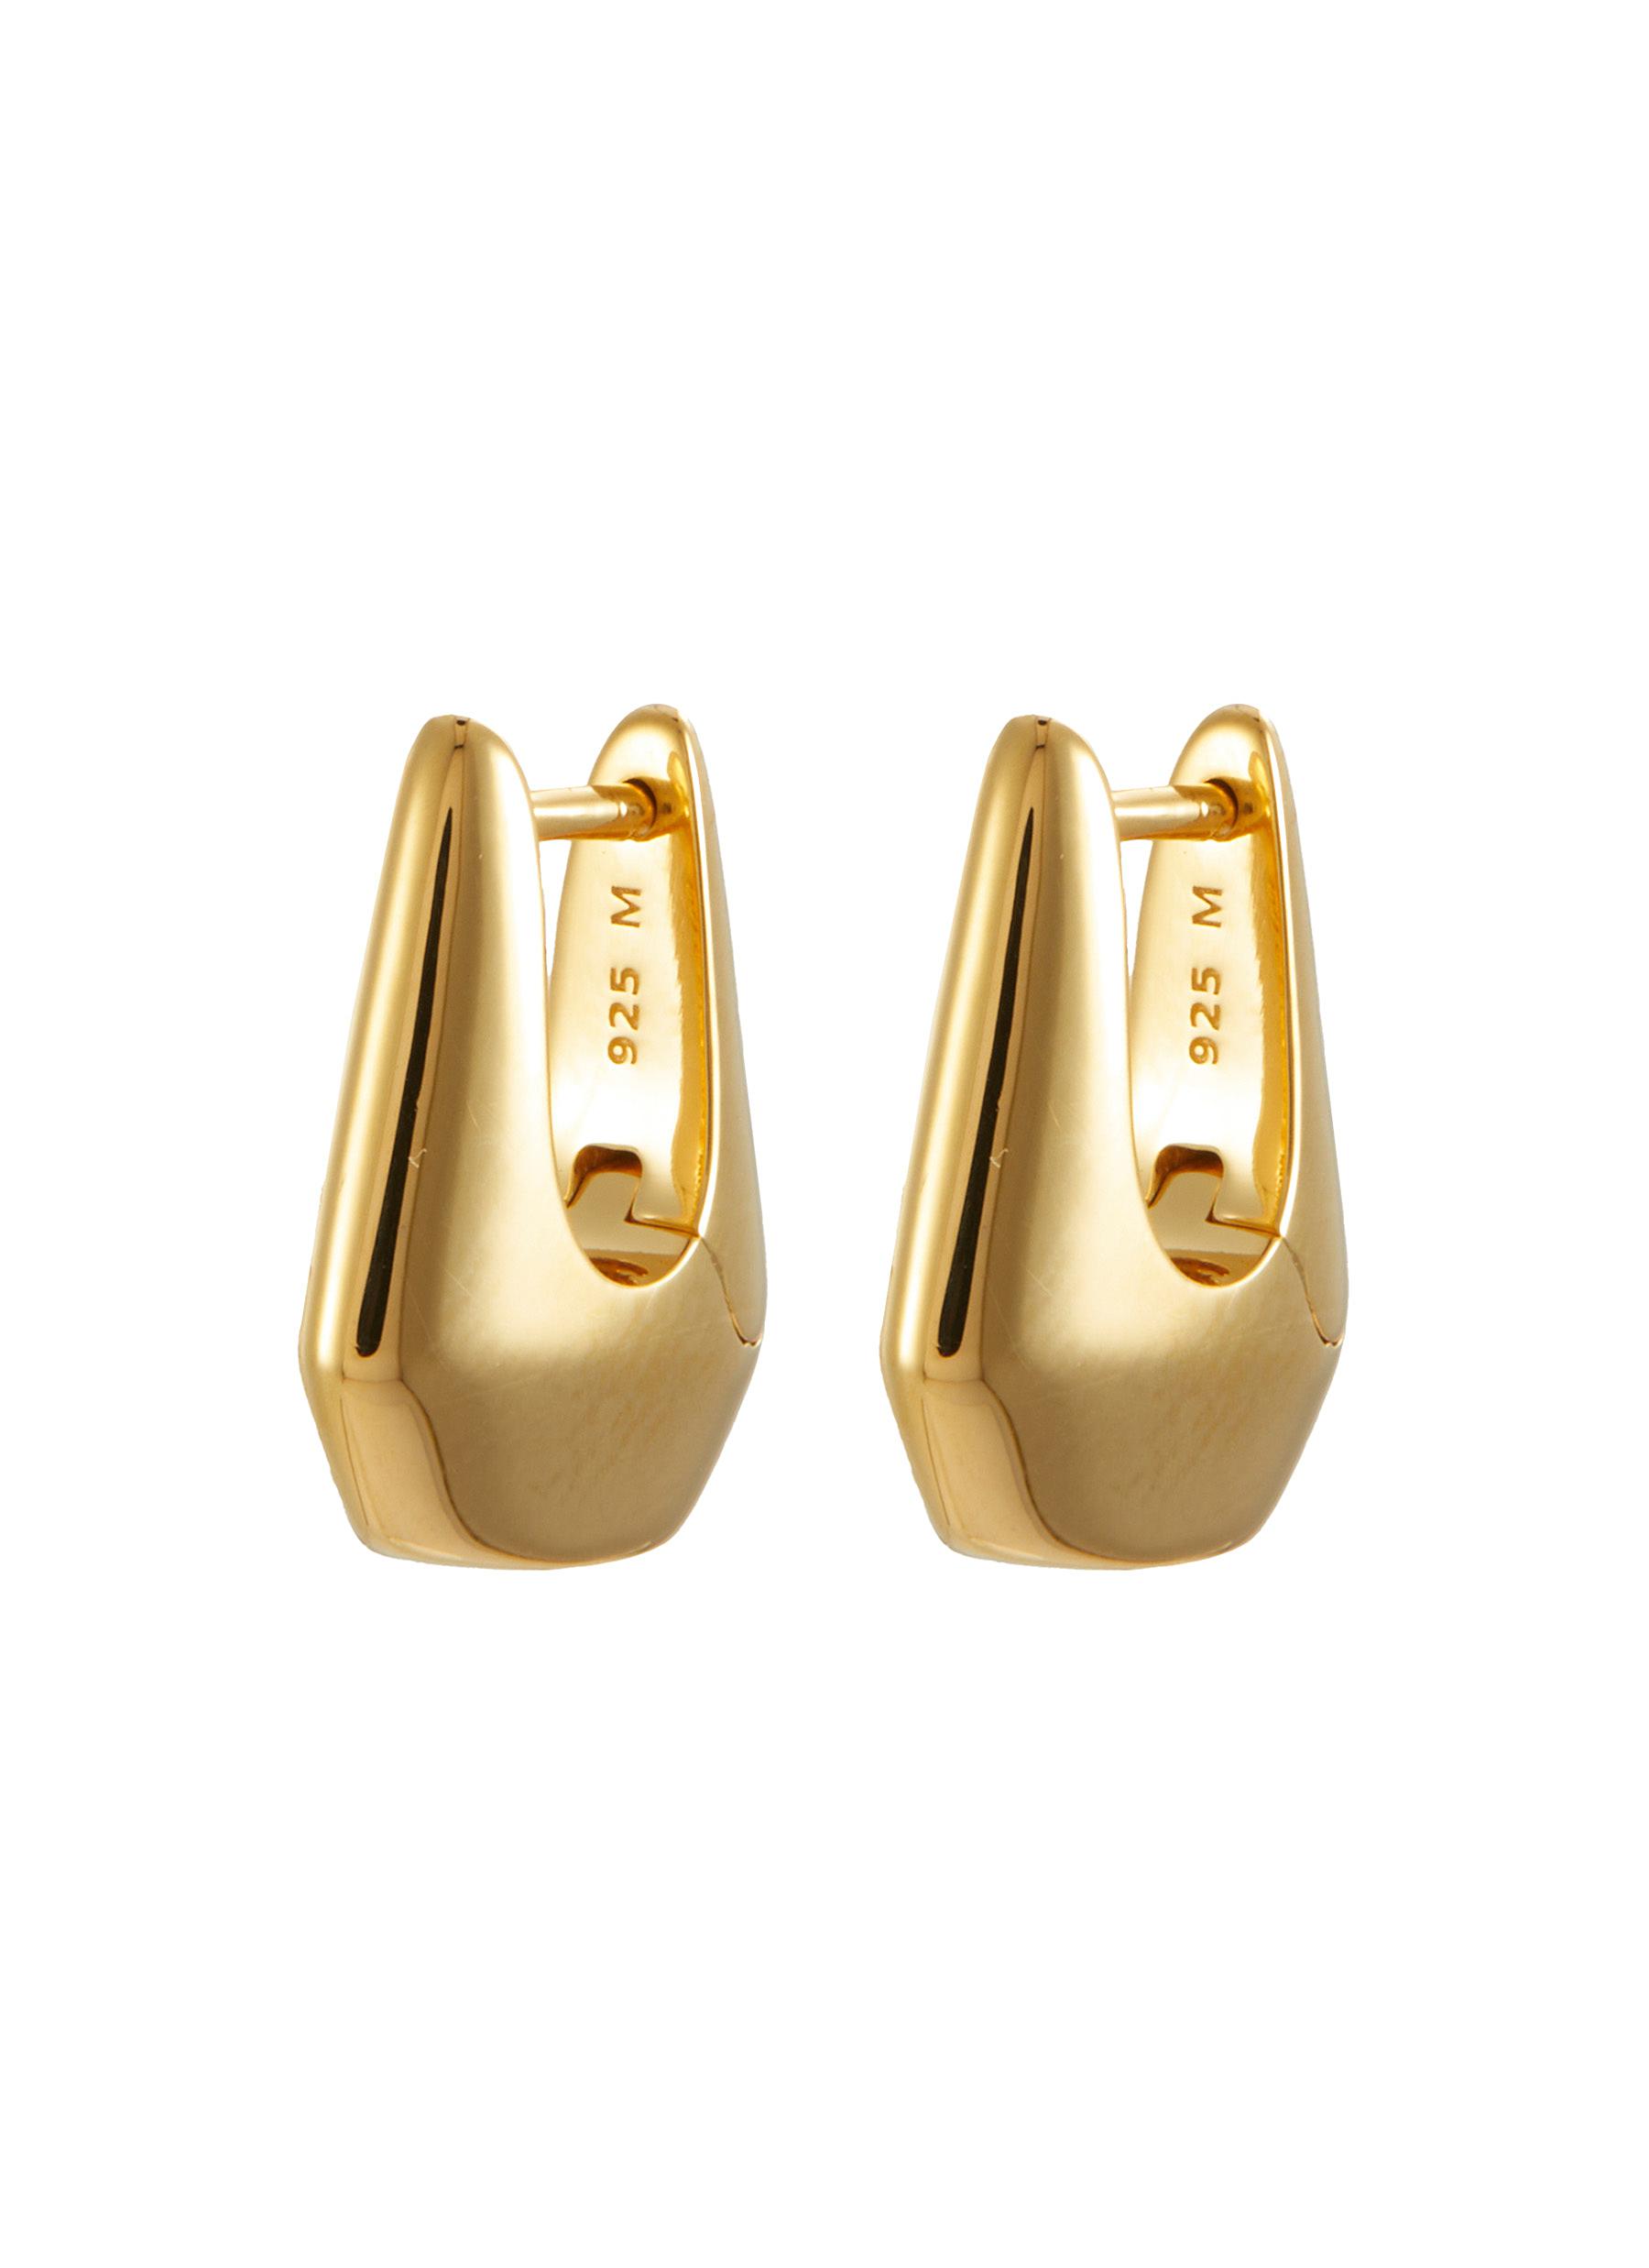 x Lucy Williams Arco 18K Gold Plated Small Hoop Earrings